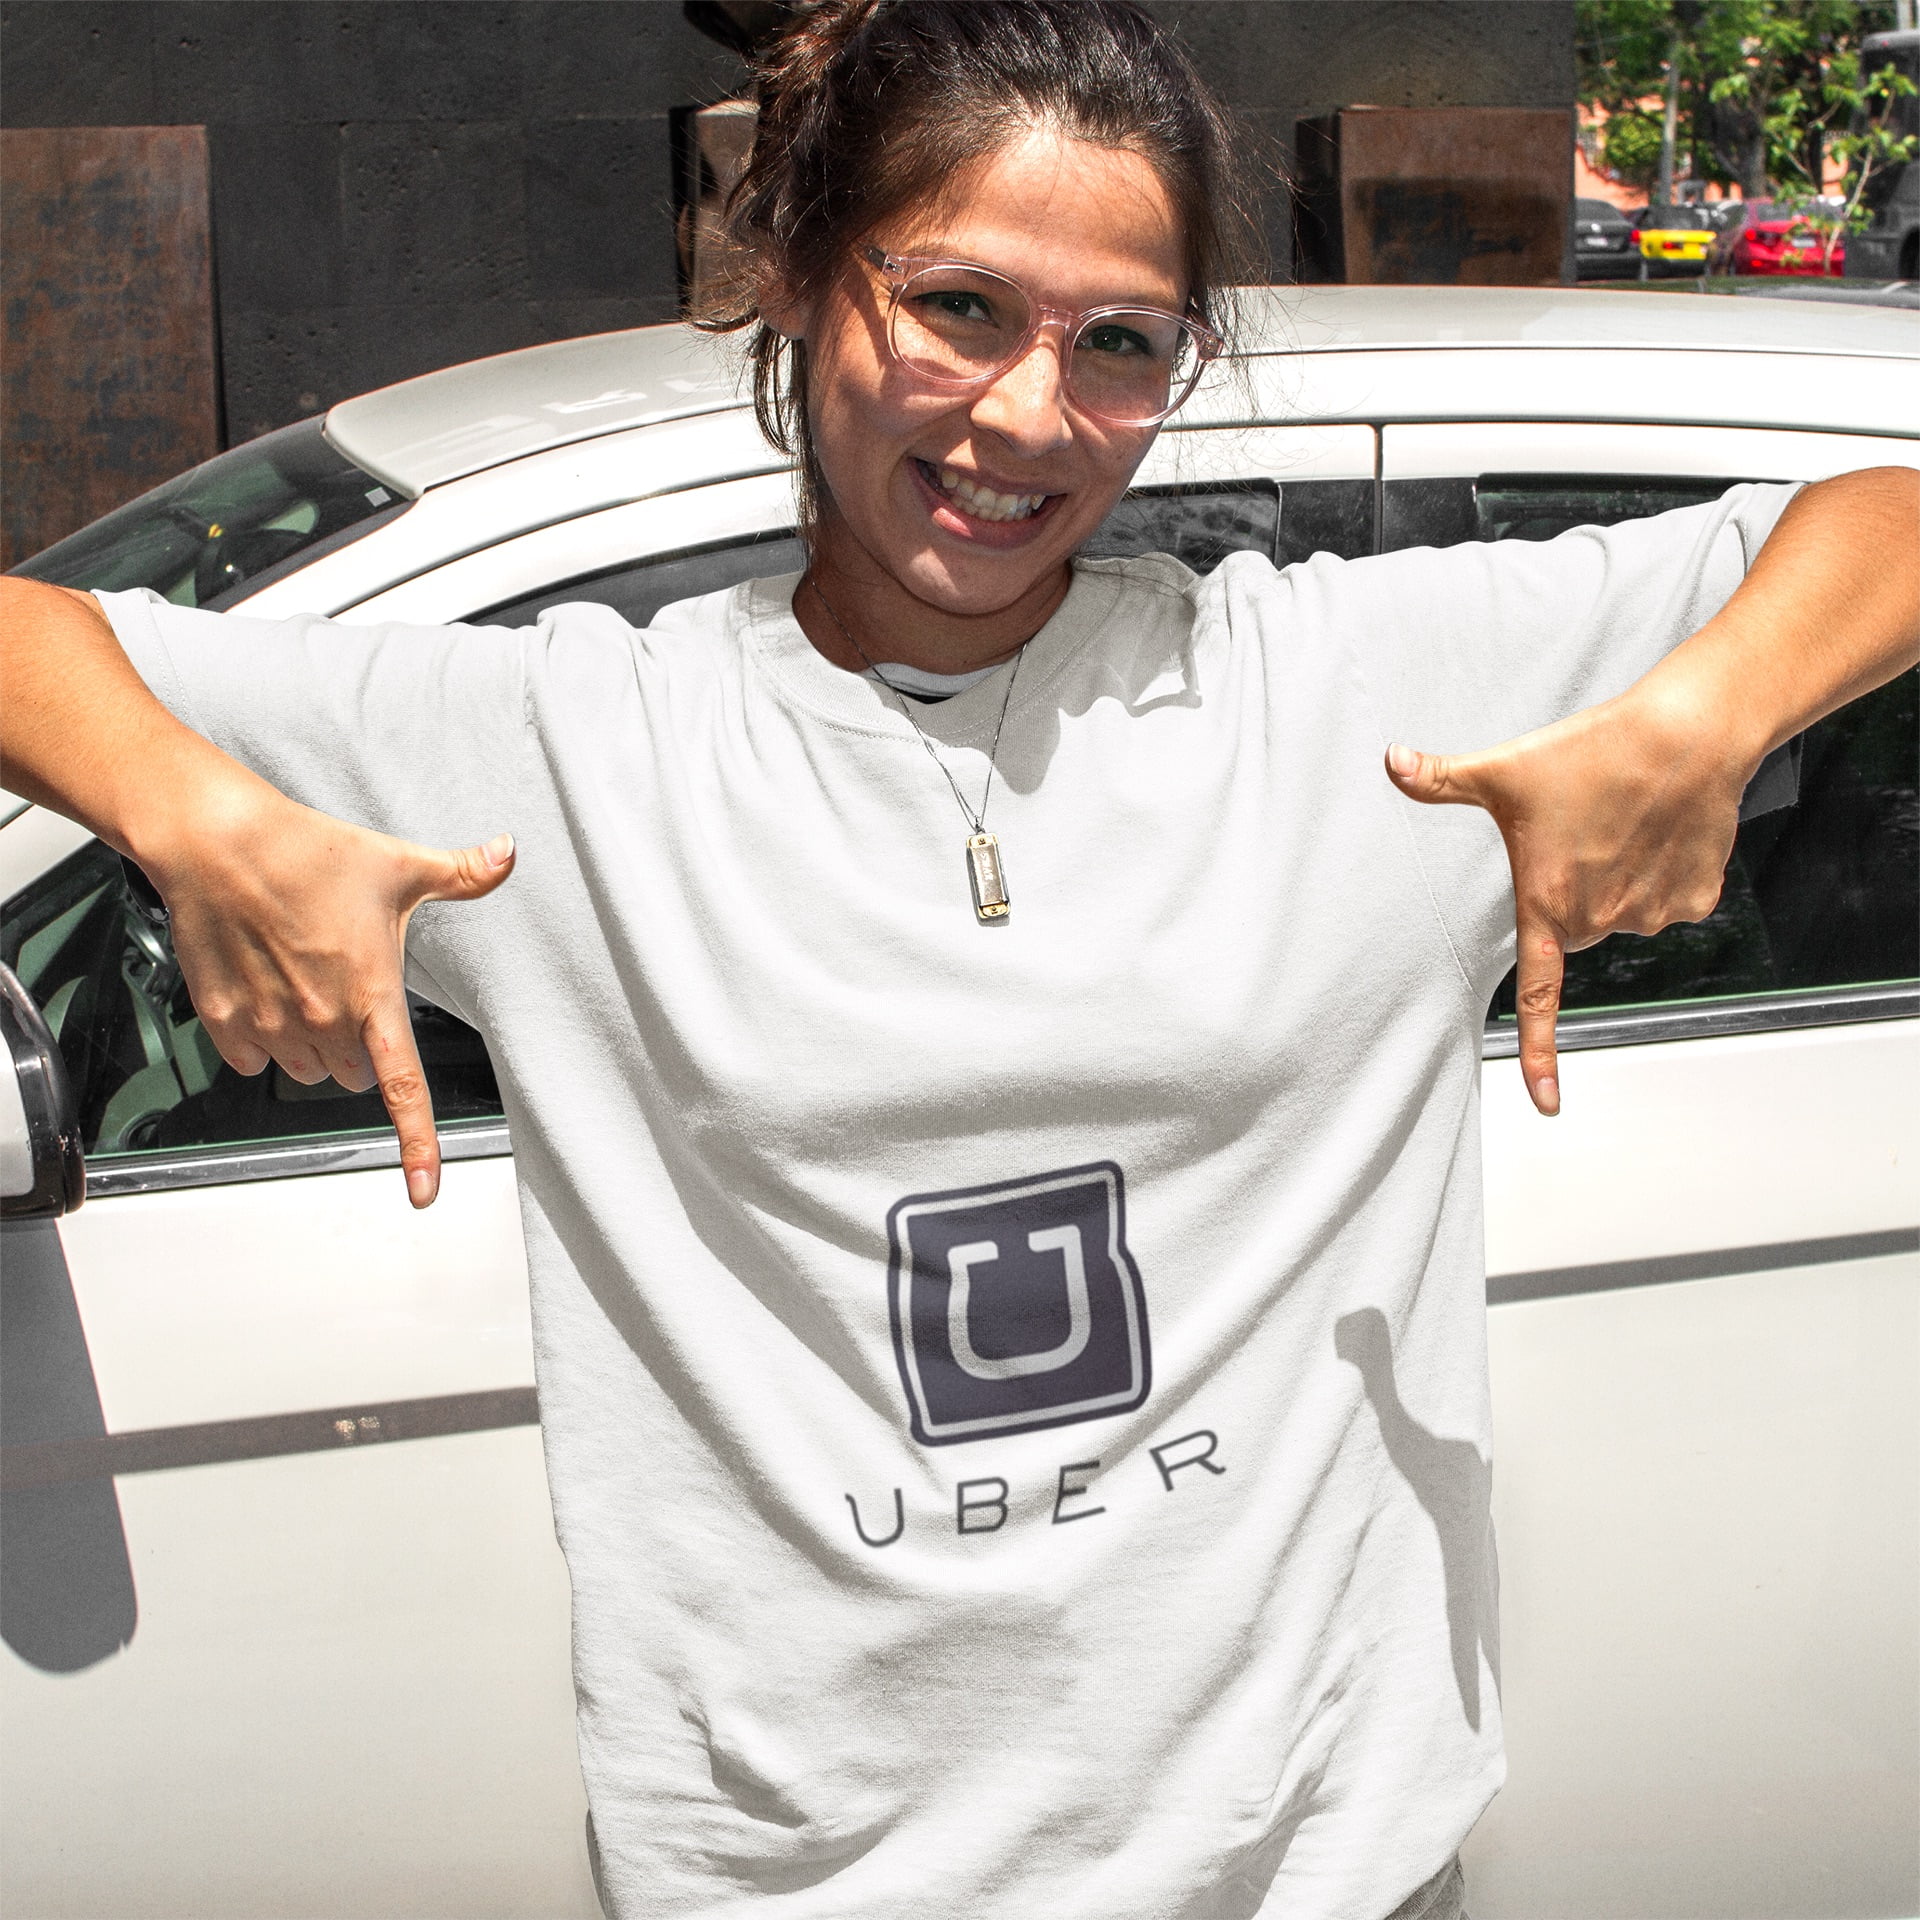 The Court of Appeal sees Uber more as an employer but is waiting for the Supreme Court for a final ruling